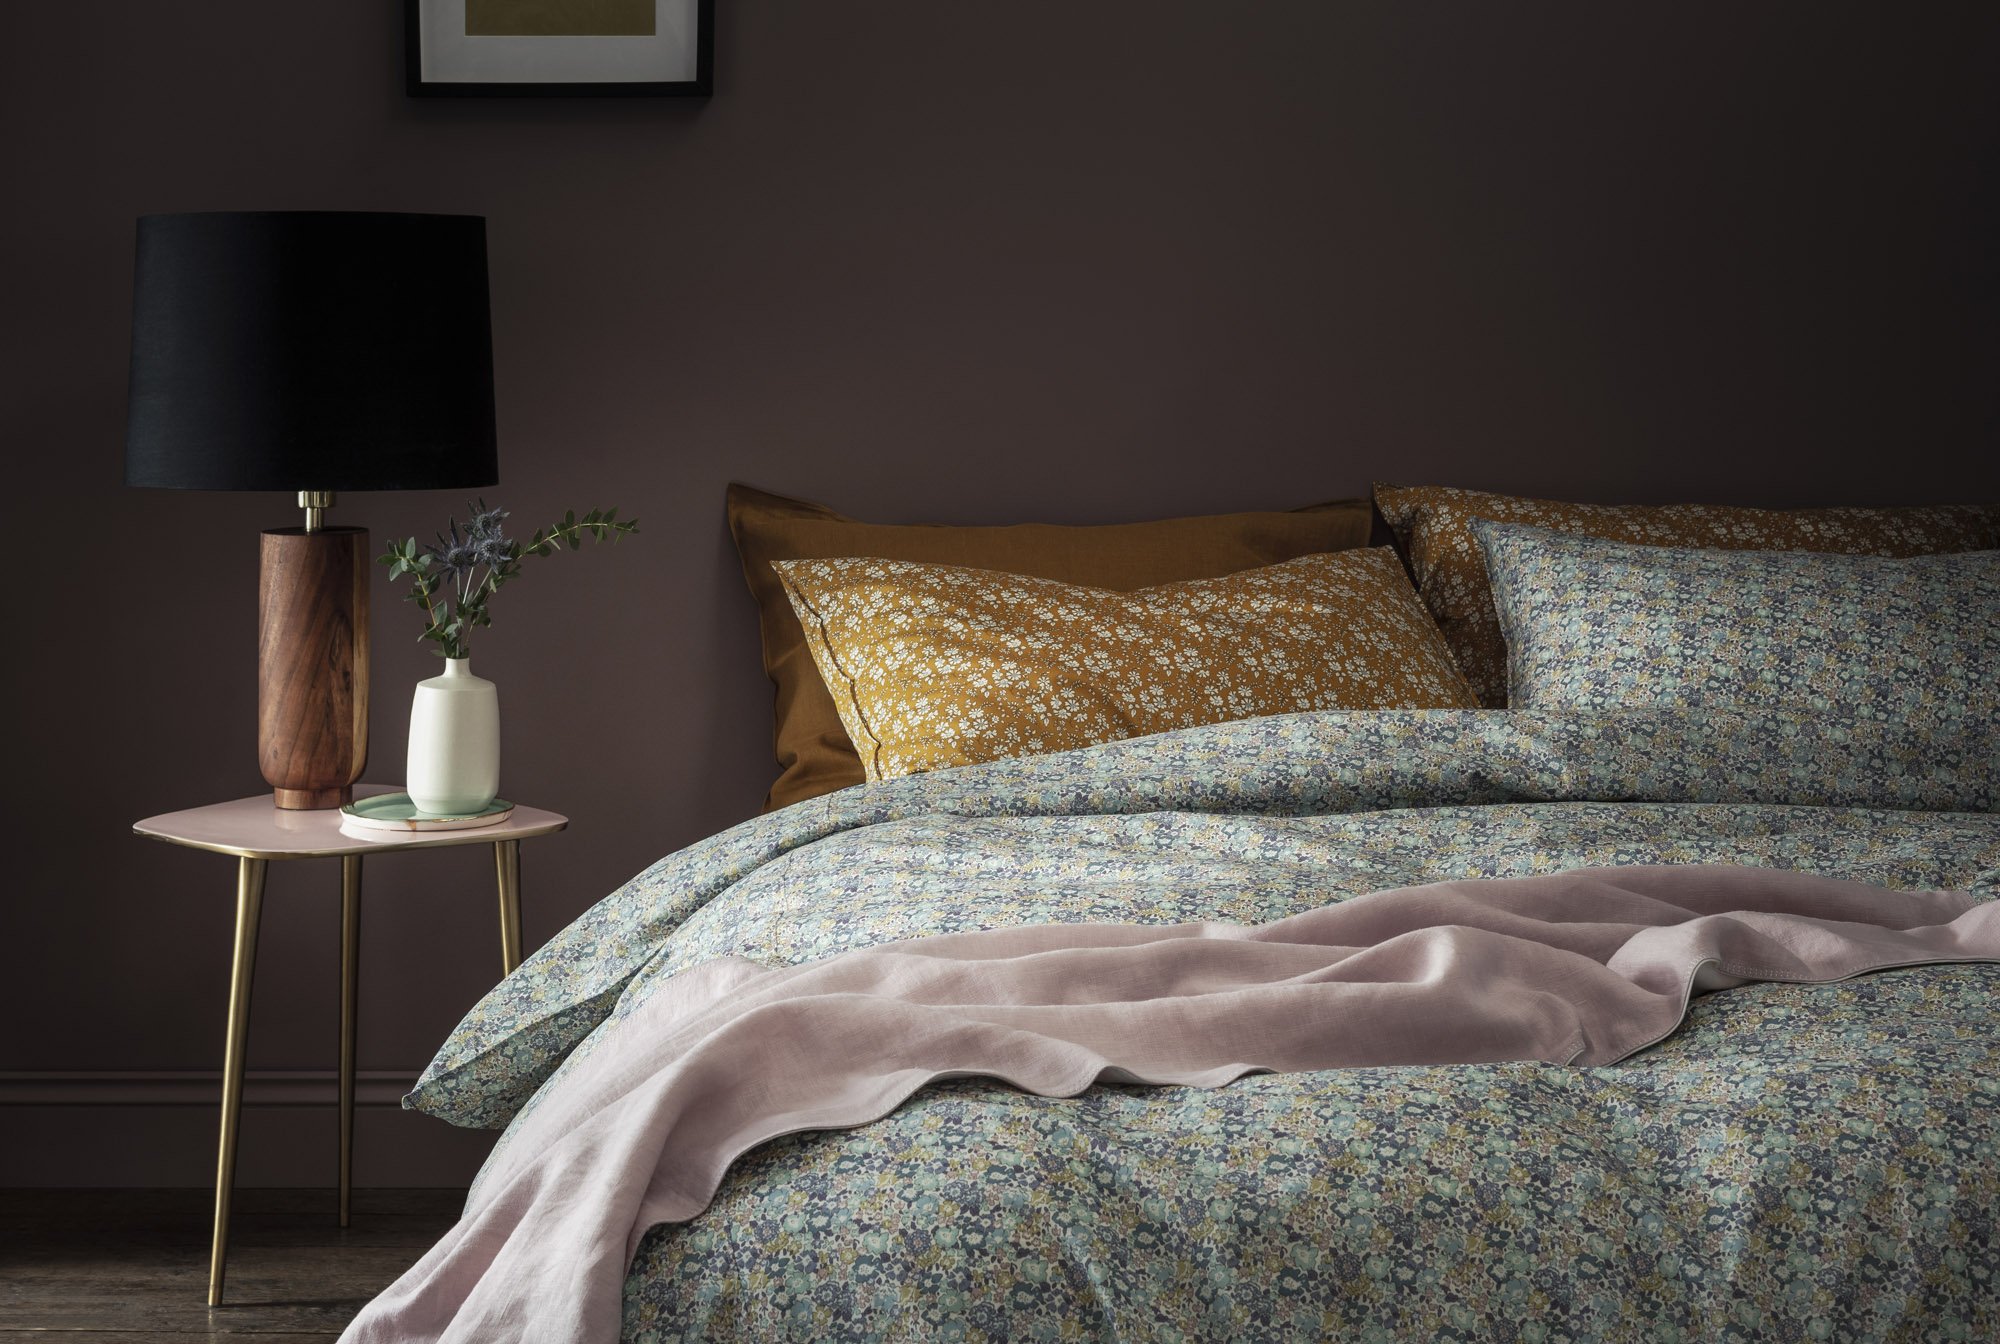 What makes Liberty Print fabric So Desirable For Bedding?